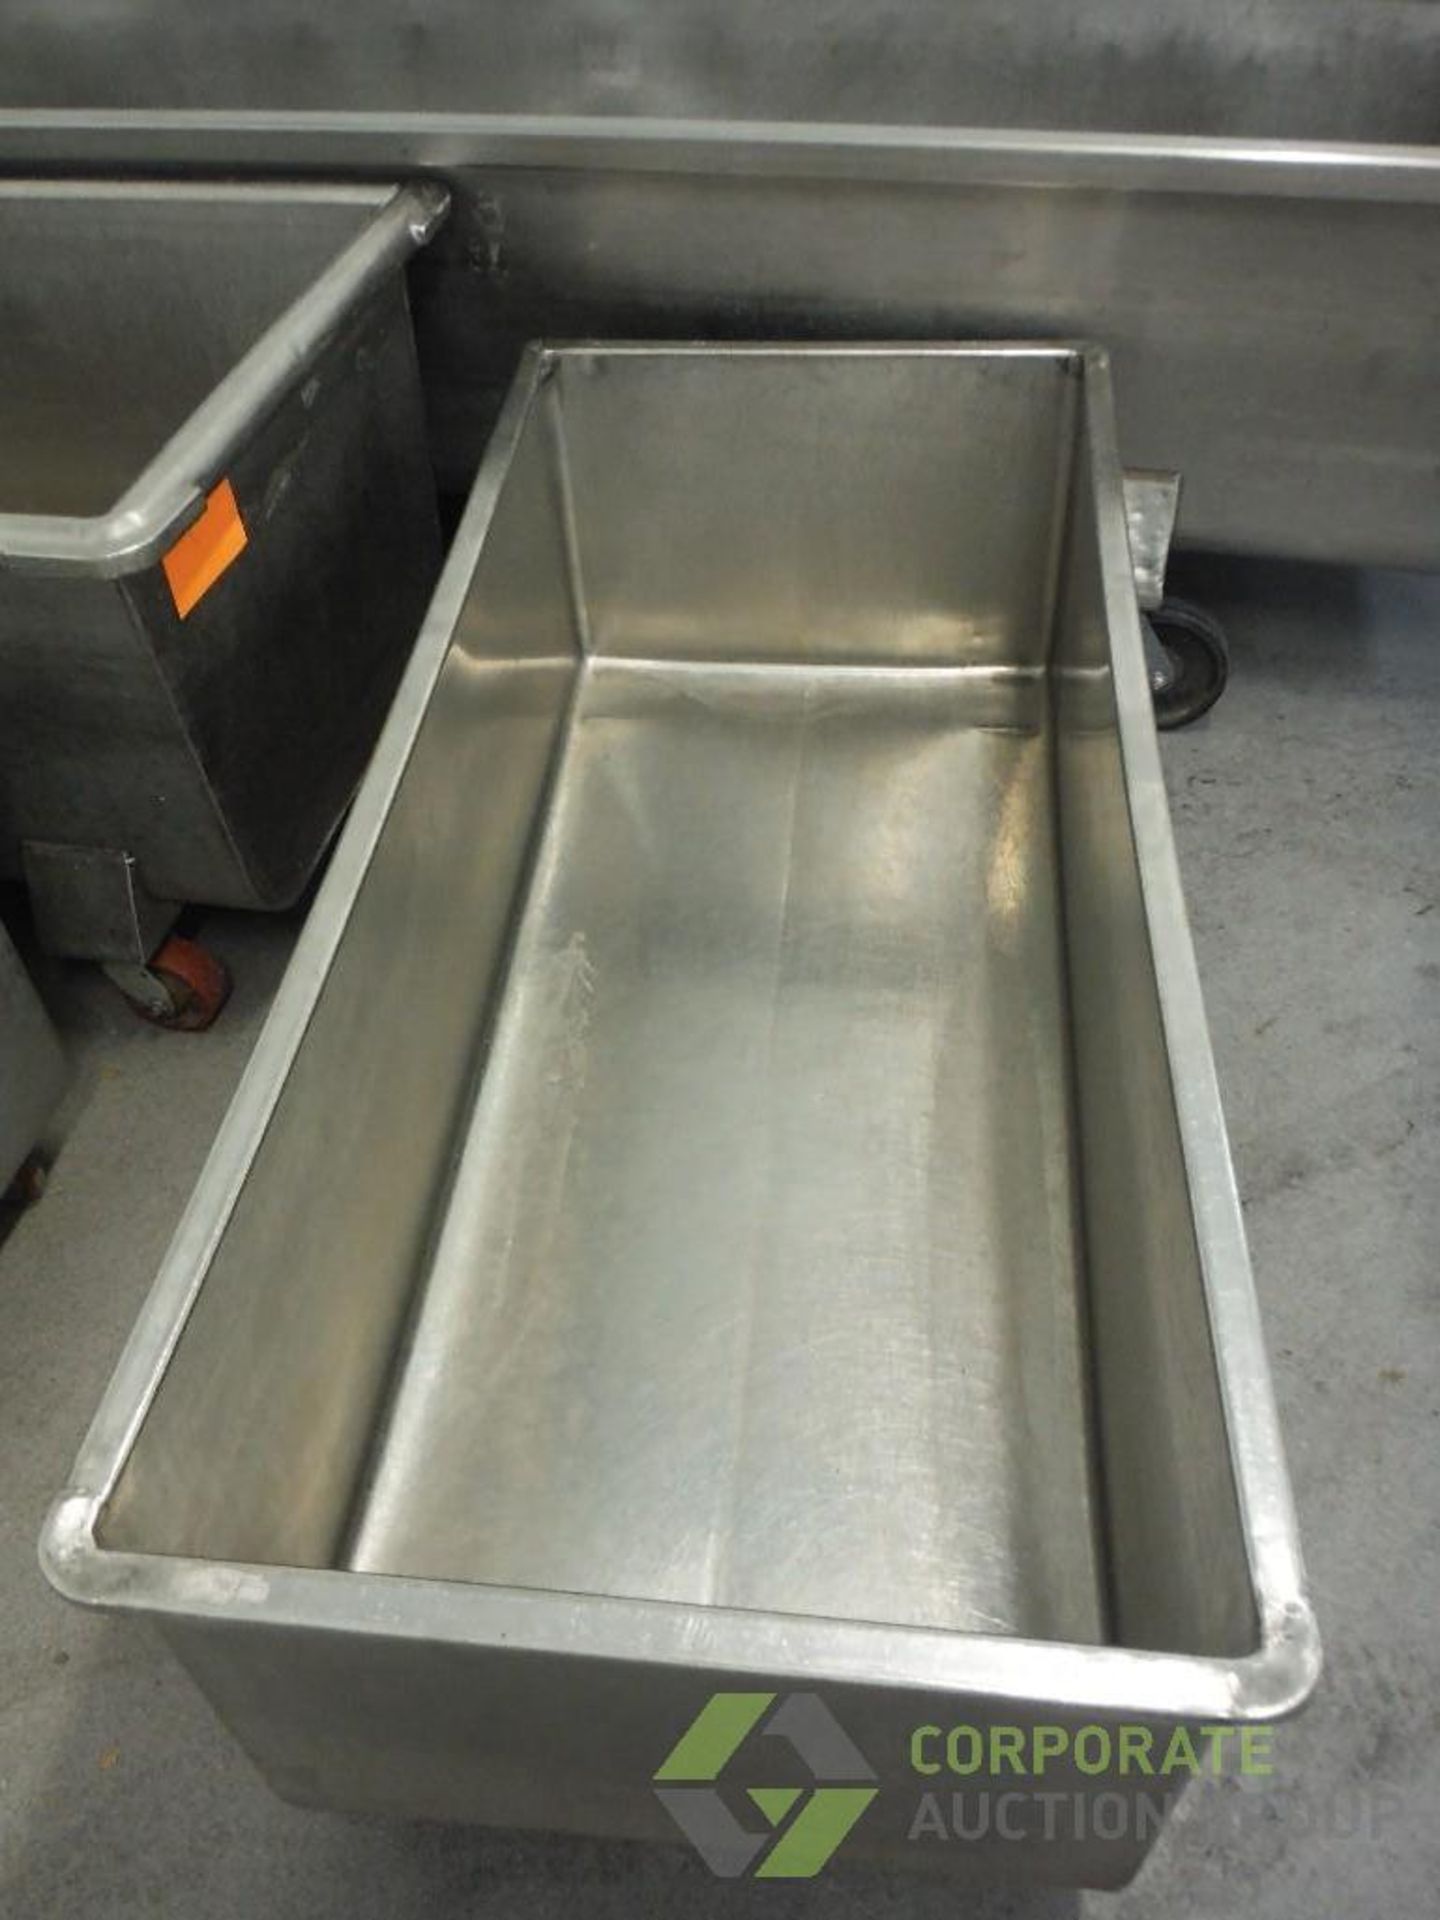 SS trough, 62 in. long x 27 in. wide x 19 in. tall, on casters - Image 2 of 2